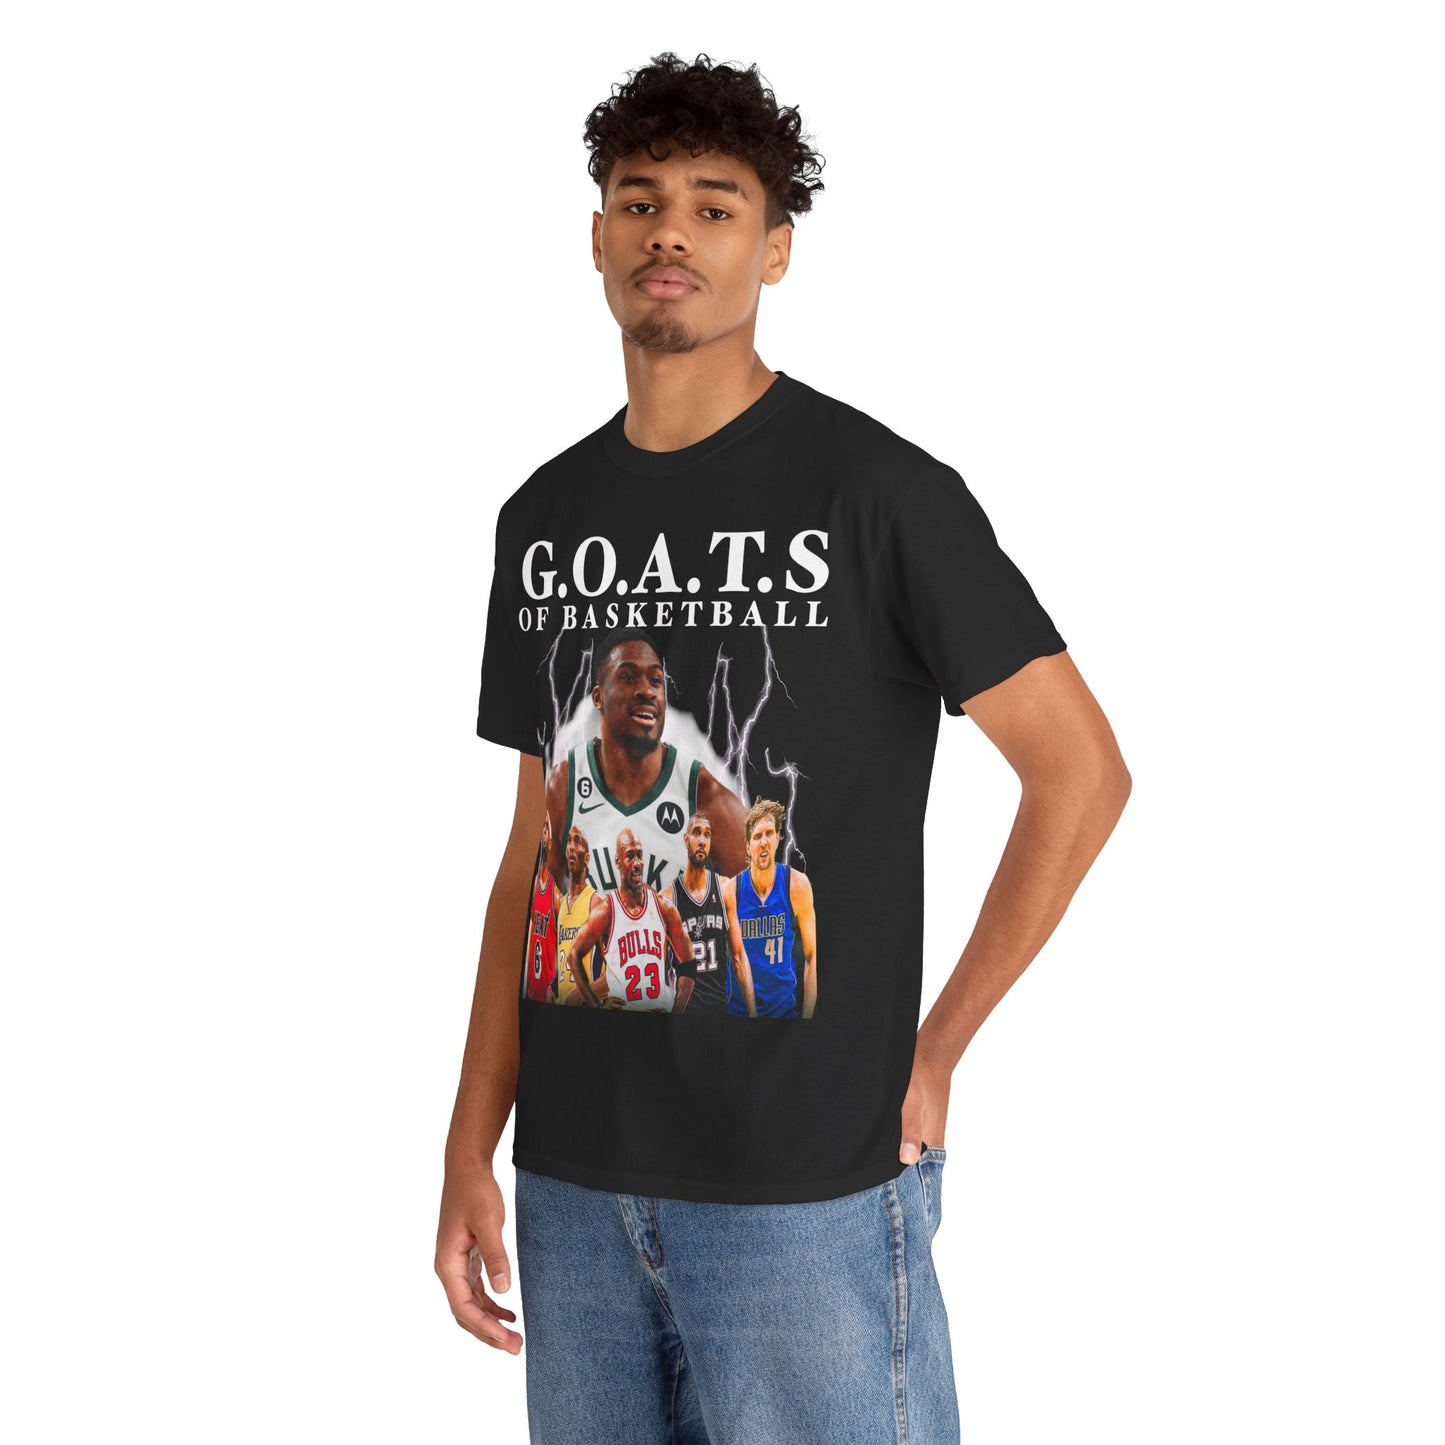 G.O.A.T.S of Basketball